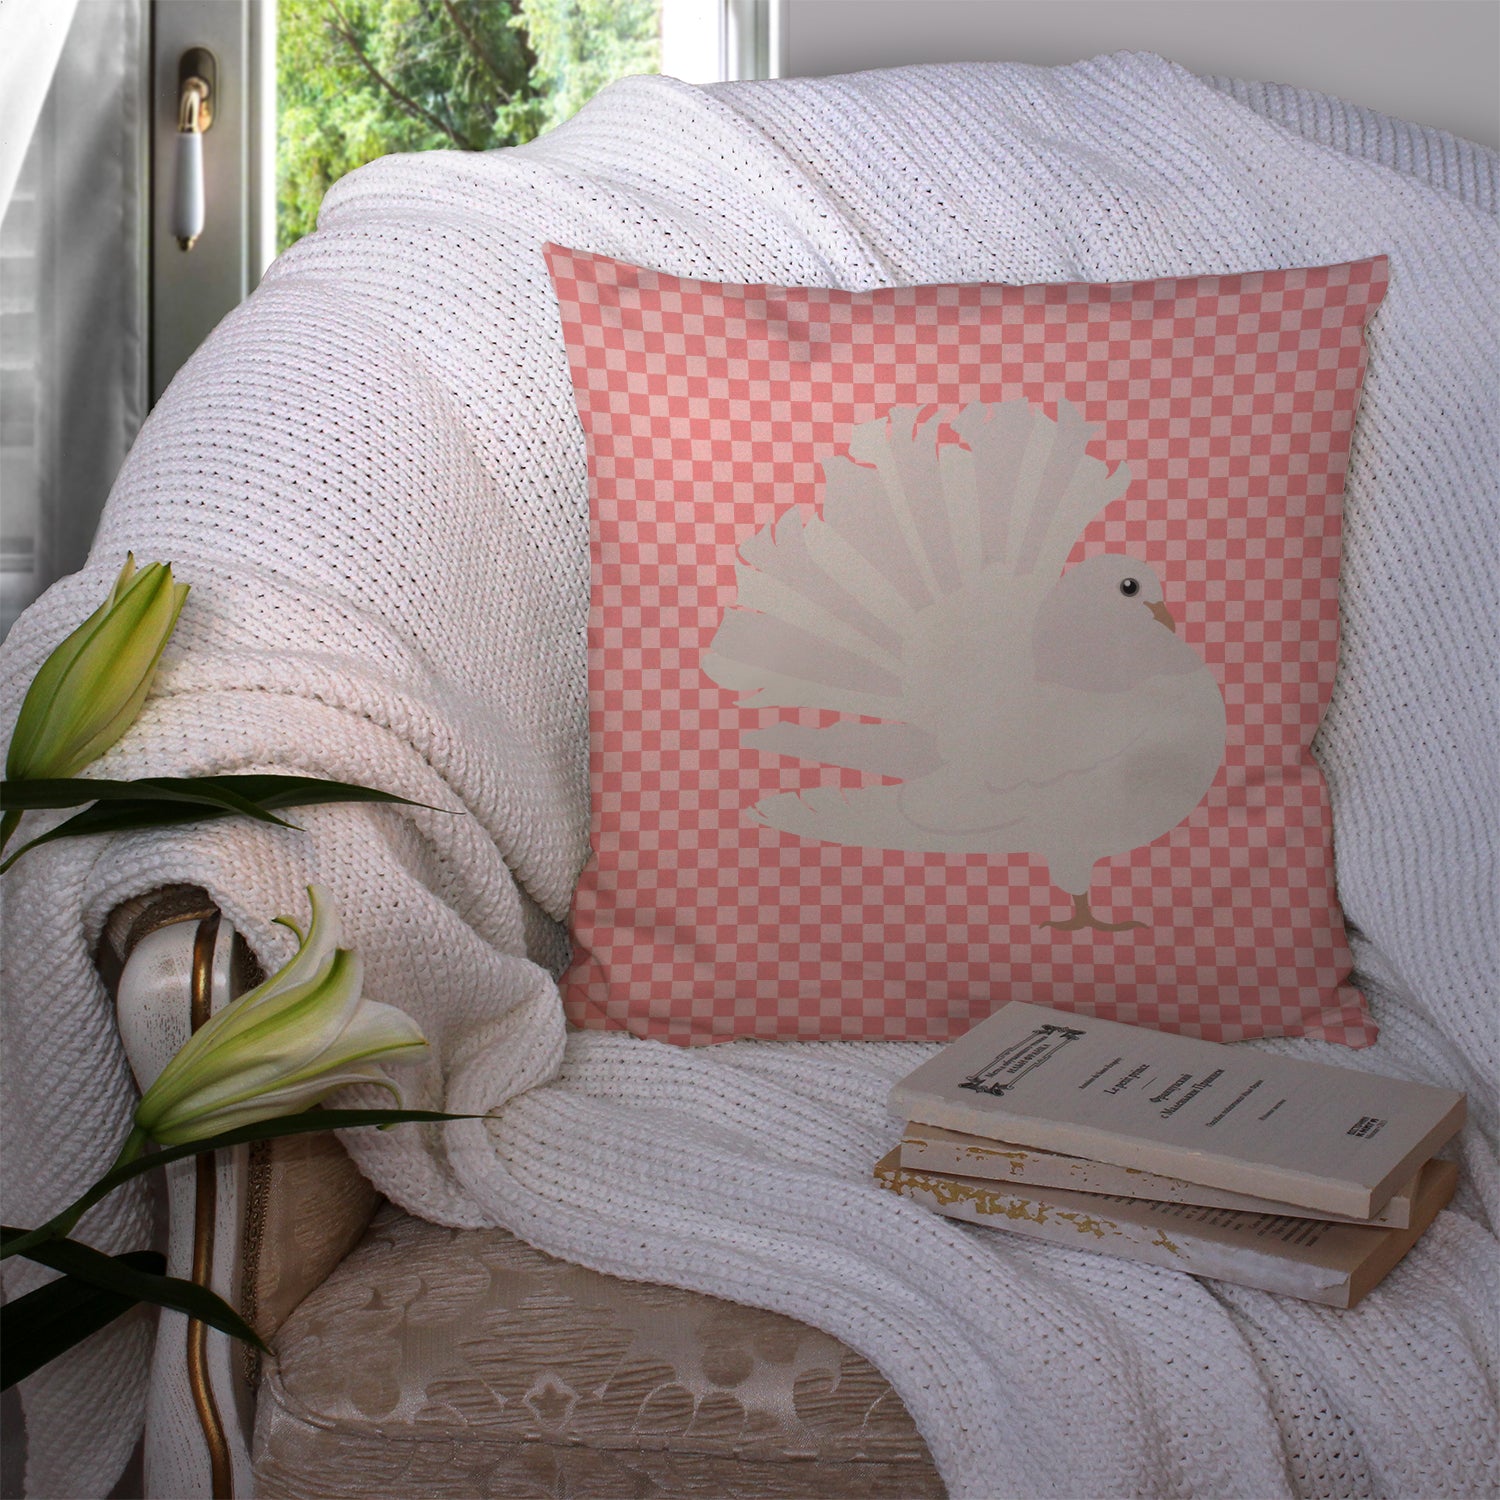 Silver Fantail Pigeon Pink Check Fabric Decorative Pillow BB7950PW1414 - the-store.com